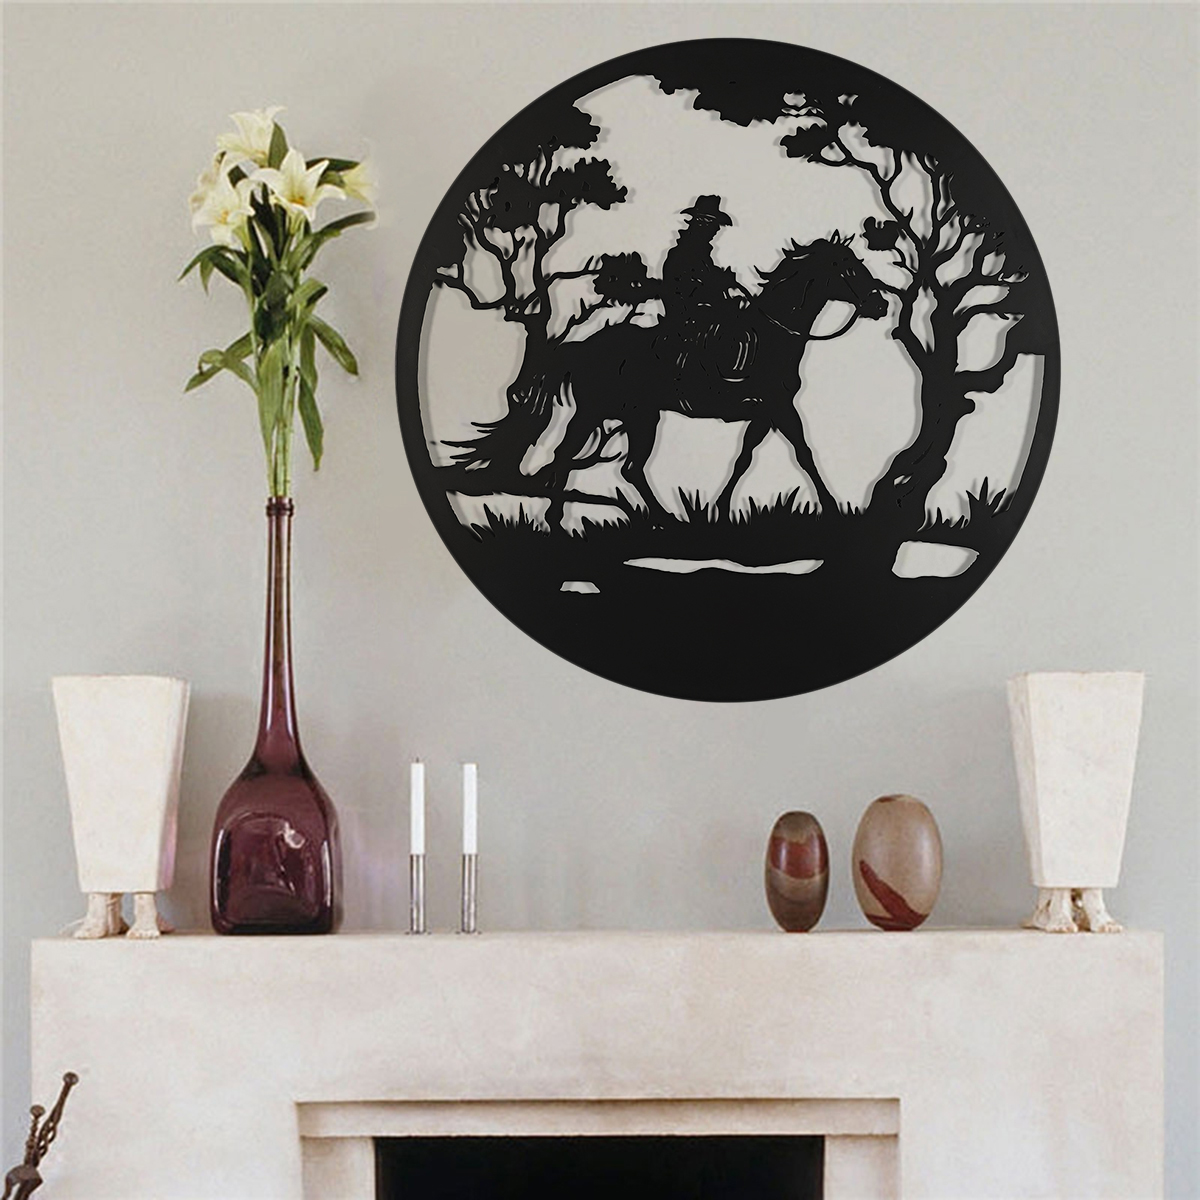 Man-Riding-Horse-In-Forest-Round-Black-Metal-Wall-Hanging-Art-Decoration-Room-1794308-3